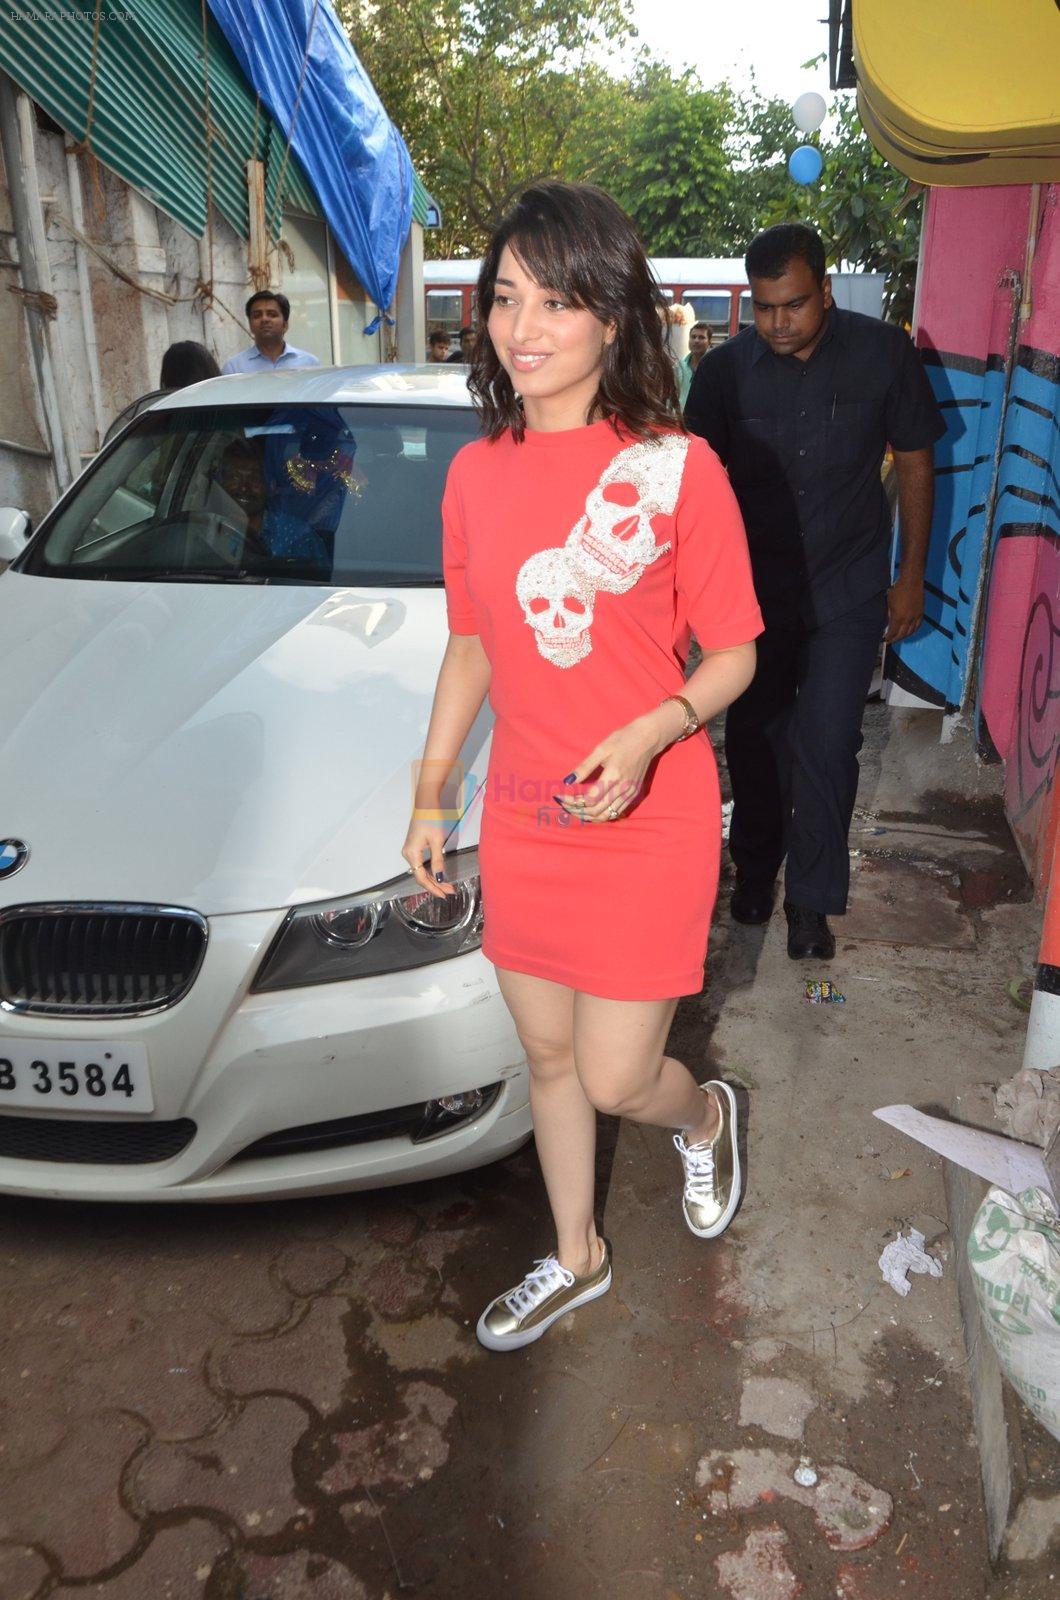 Tamannaah Bhatia launches Out of the Box make up academy on 28th May 2016